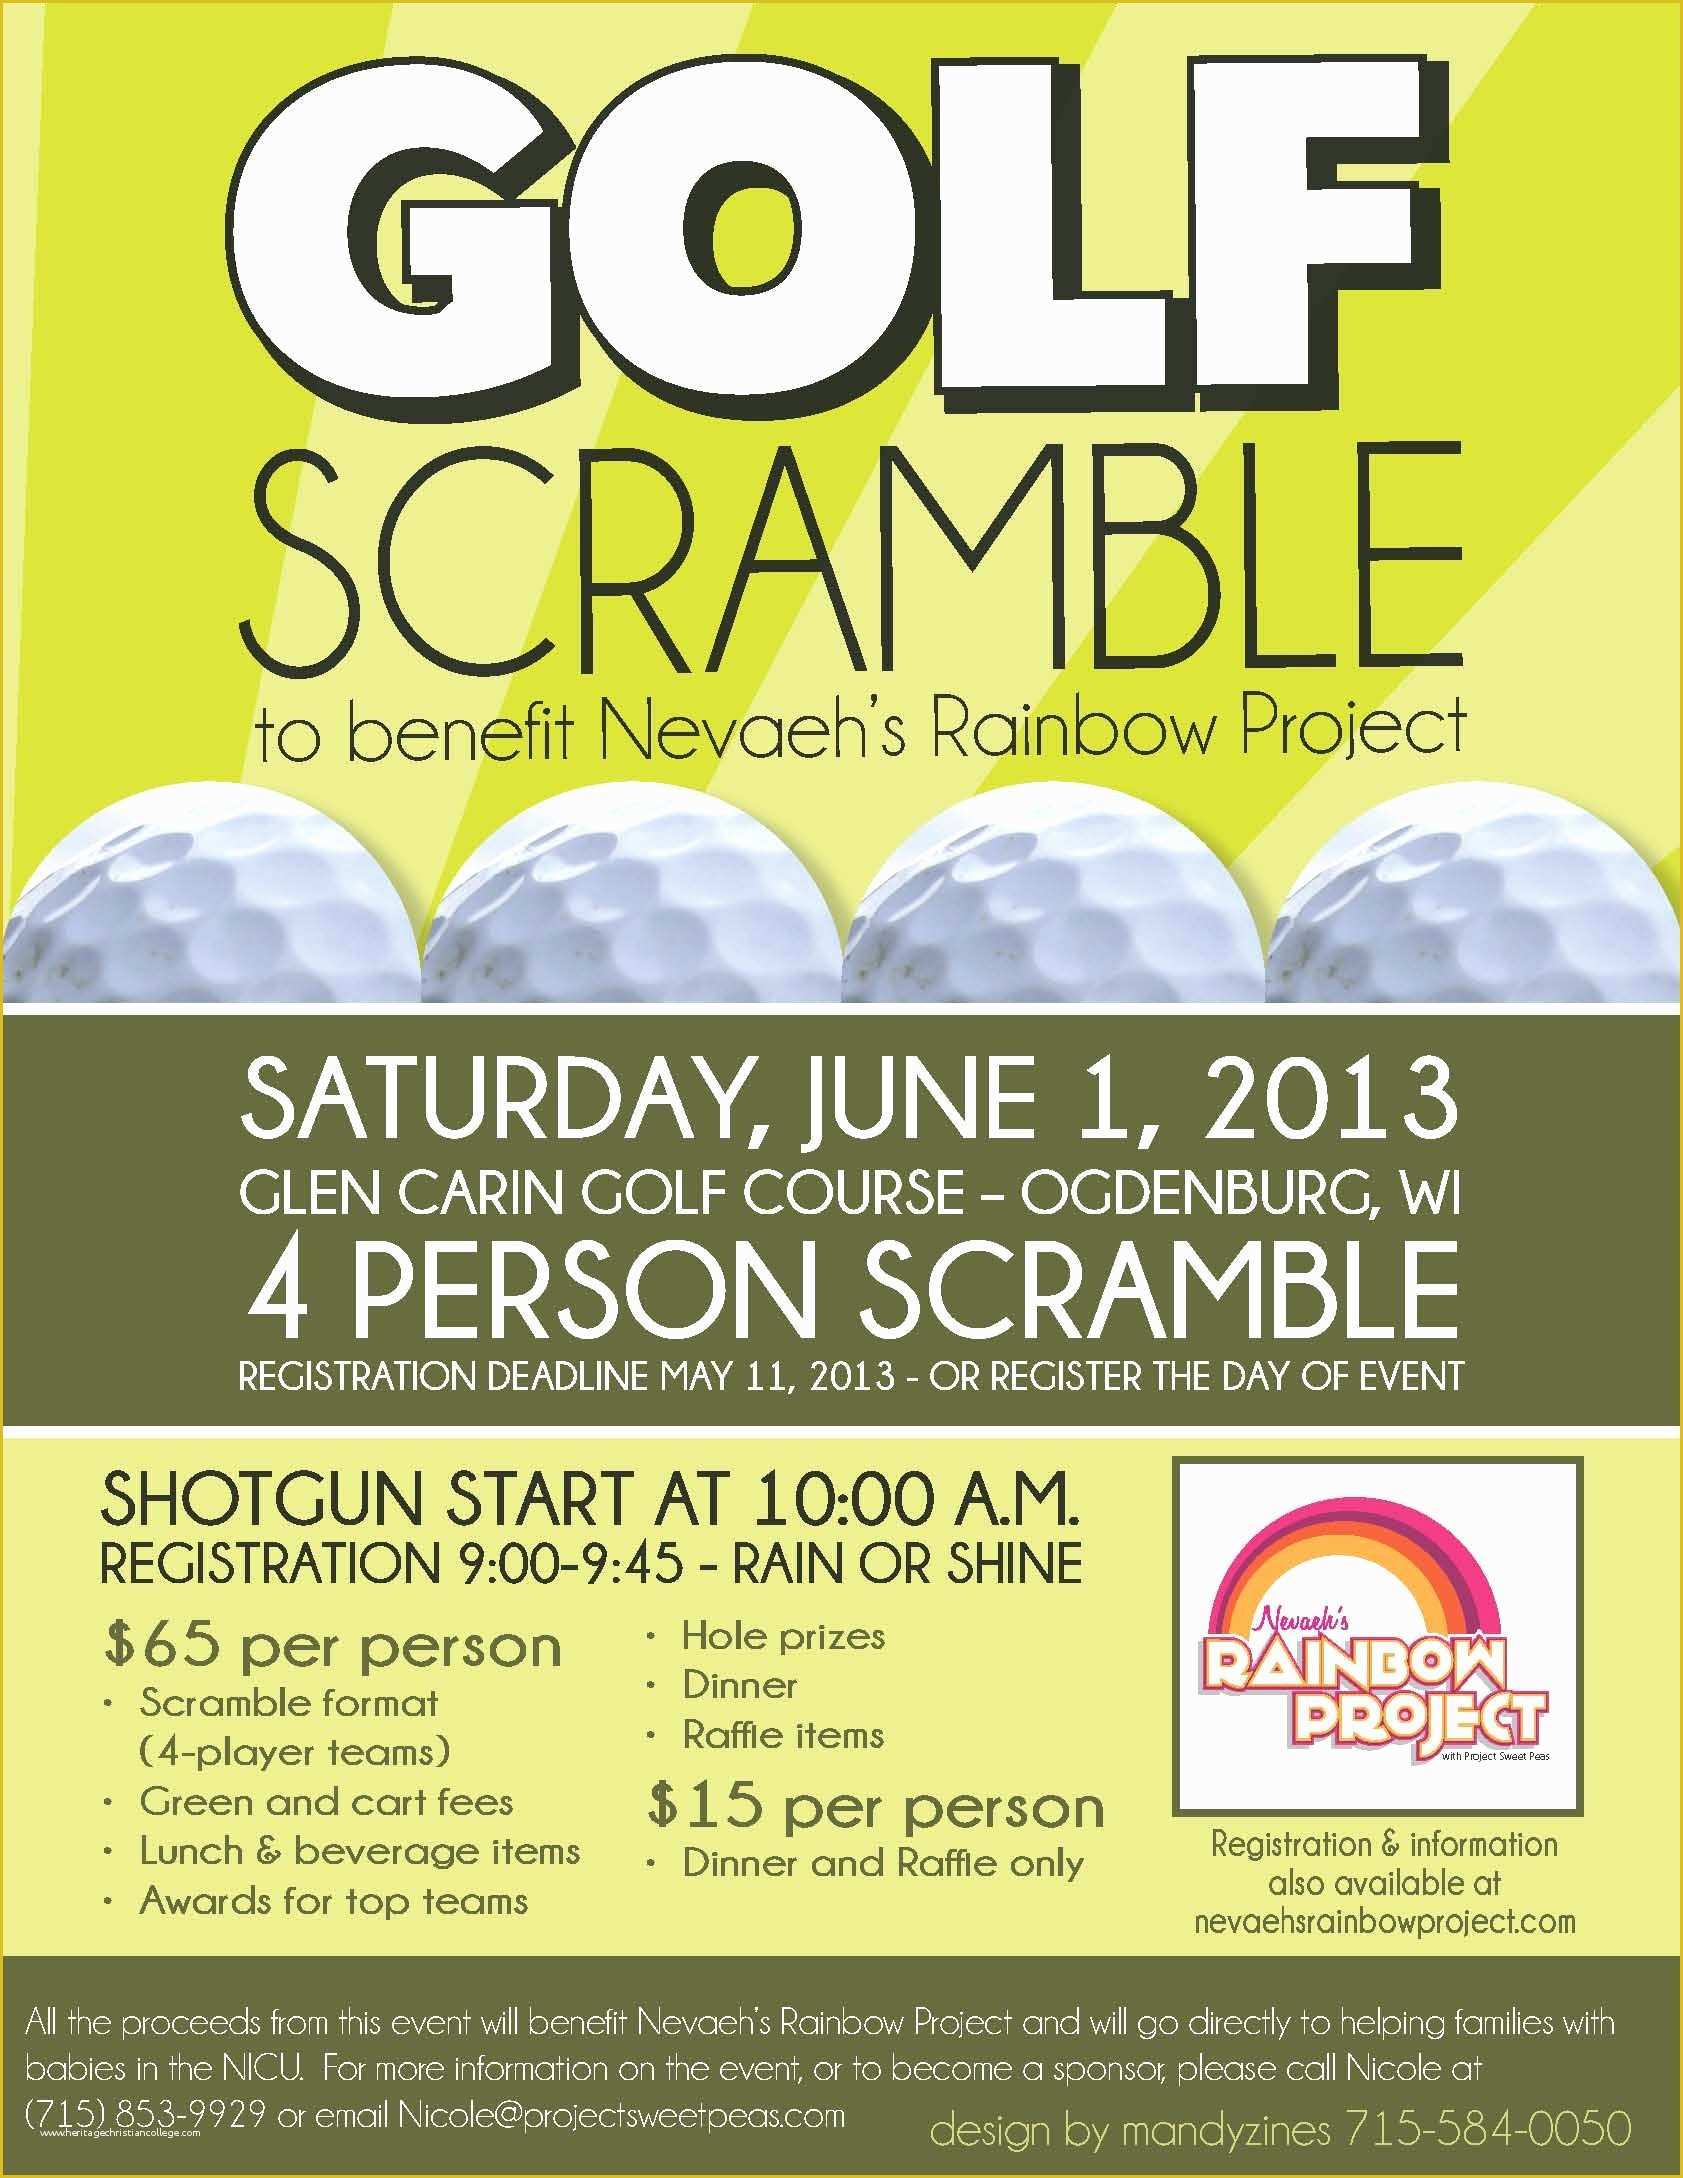 Free Golf Outing Flyer Template Of Pin by Estrella Madrigal On Flyer Ideas Templates